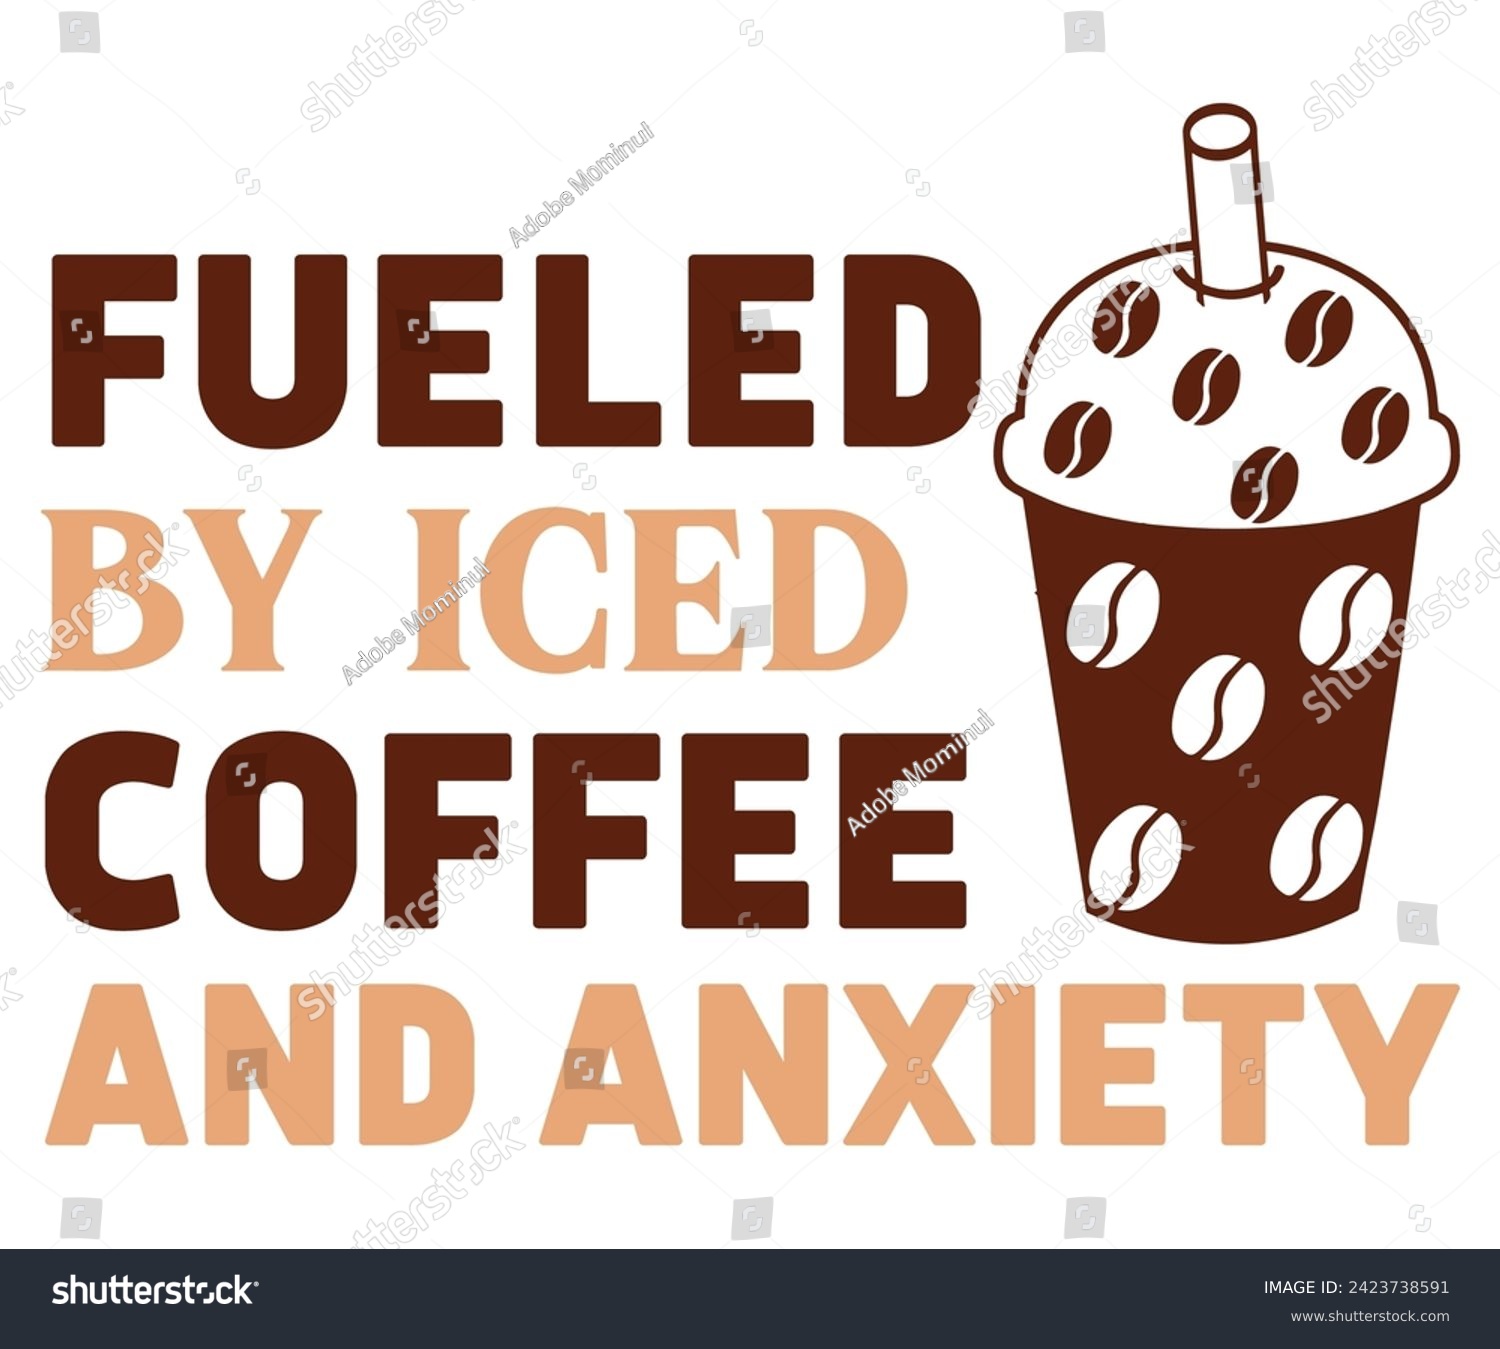 SVG of Fueled By Iced Coffee and Anxiety,
Coffee Svg,Coffee Retro,Funny Coffee Sayings,Coffee Mug Svg,Coffee Cup Svg,Gift For Coffee,Coffee Lover,Caffeine Svg,Svg Cut File,Coffee Quotes,Sublimation Design, svg